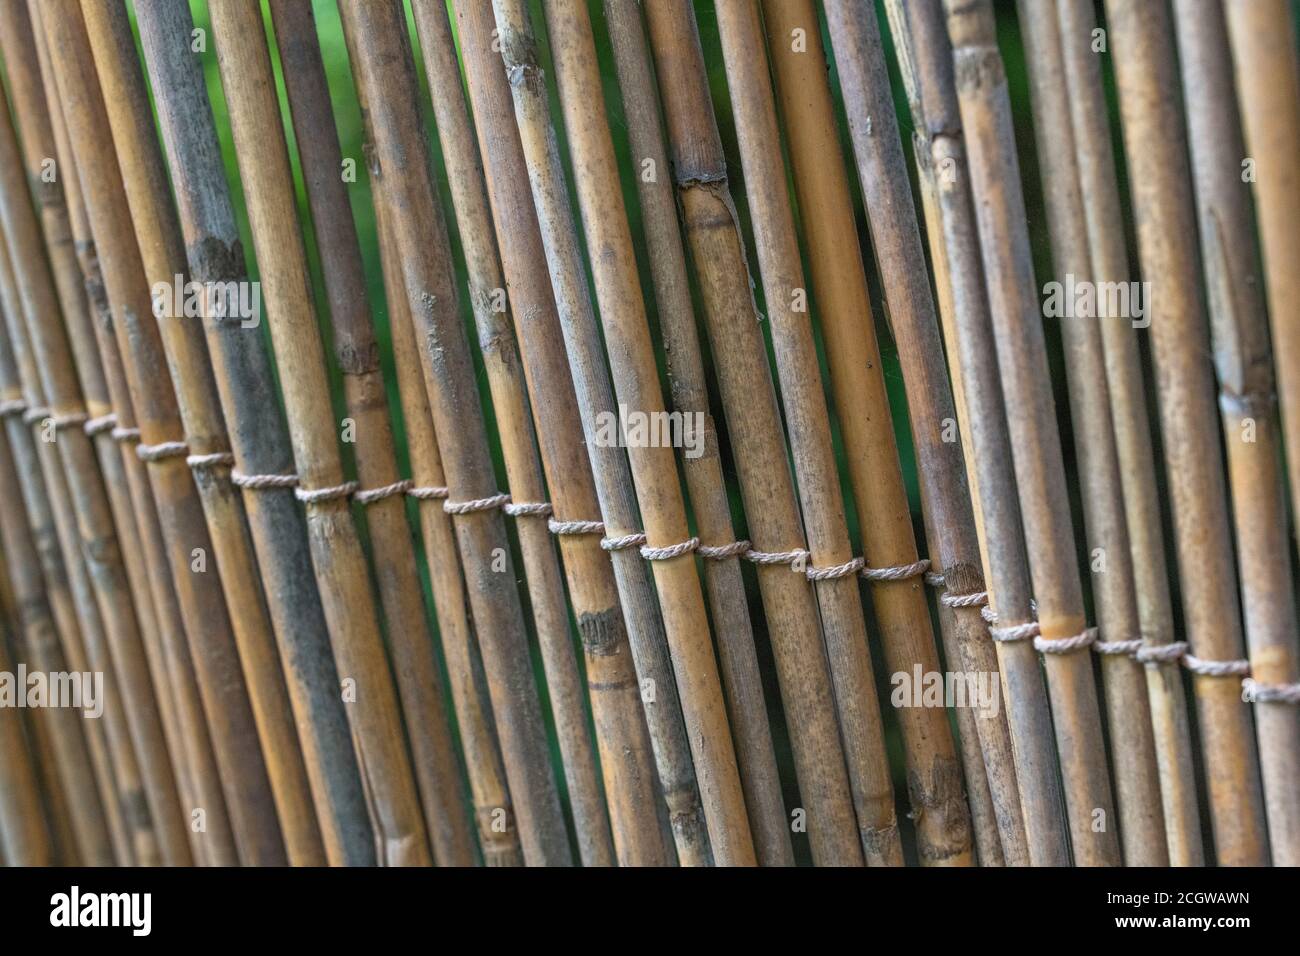 Upright section of natural reed garden screening, showing traces of early reed decay. Nice natural texture background or metaphor for gardening. Stock Photo